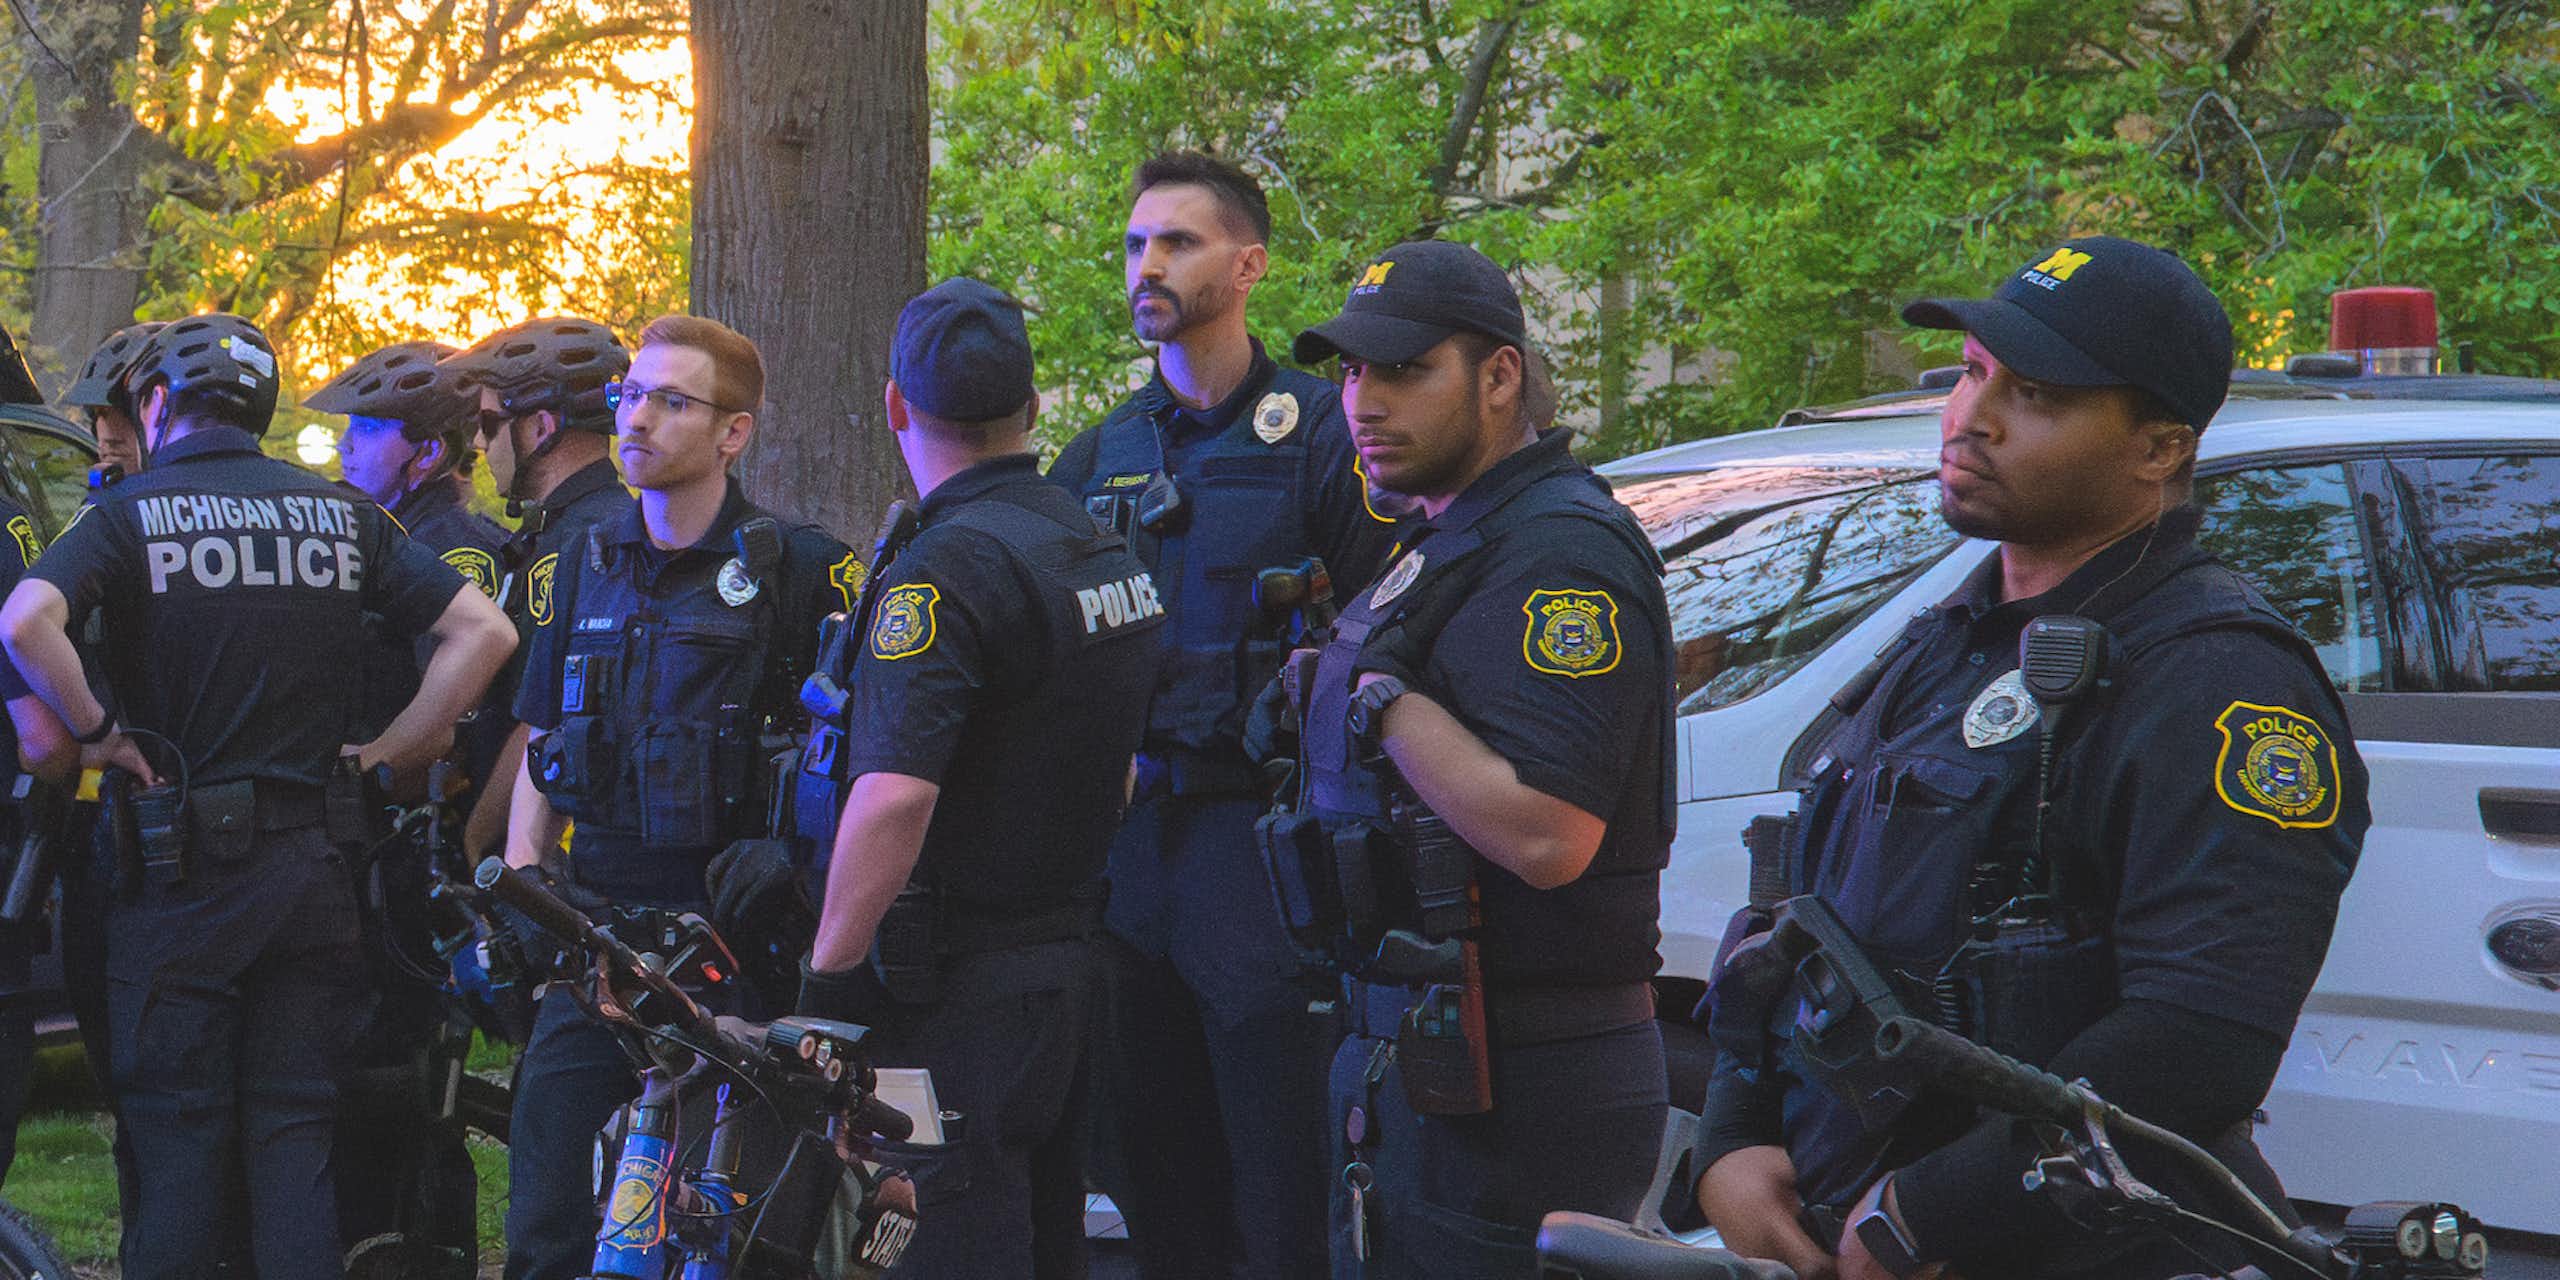 A small group of police officers, most of them white, gather near a police car and police bicycles.